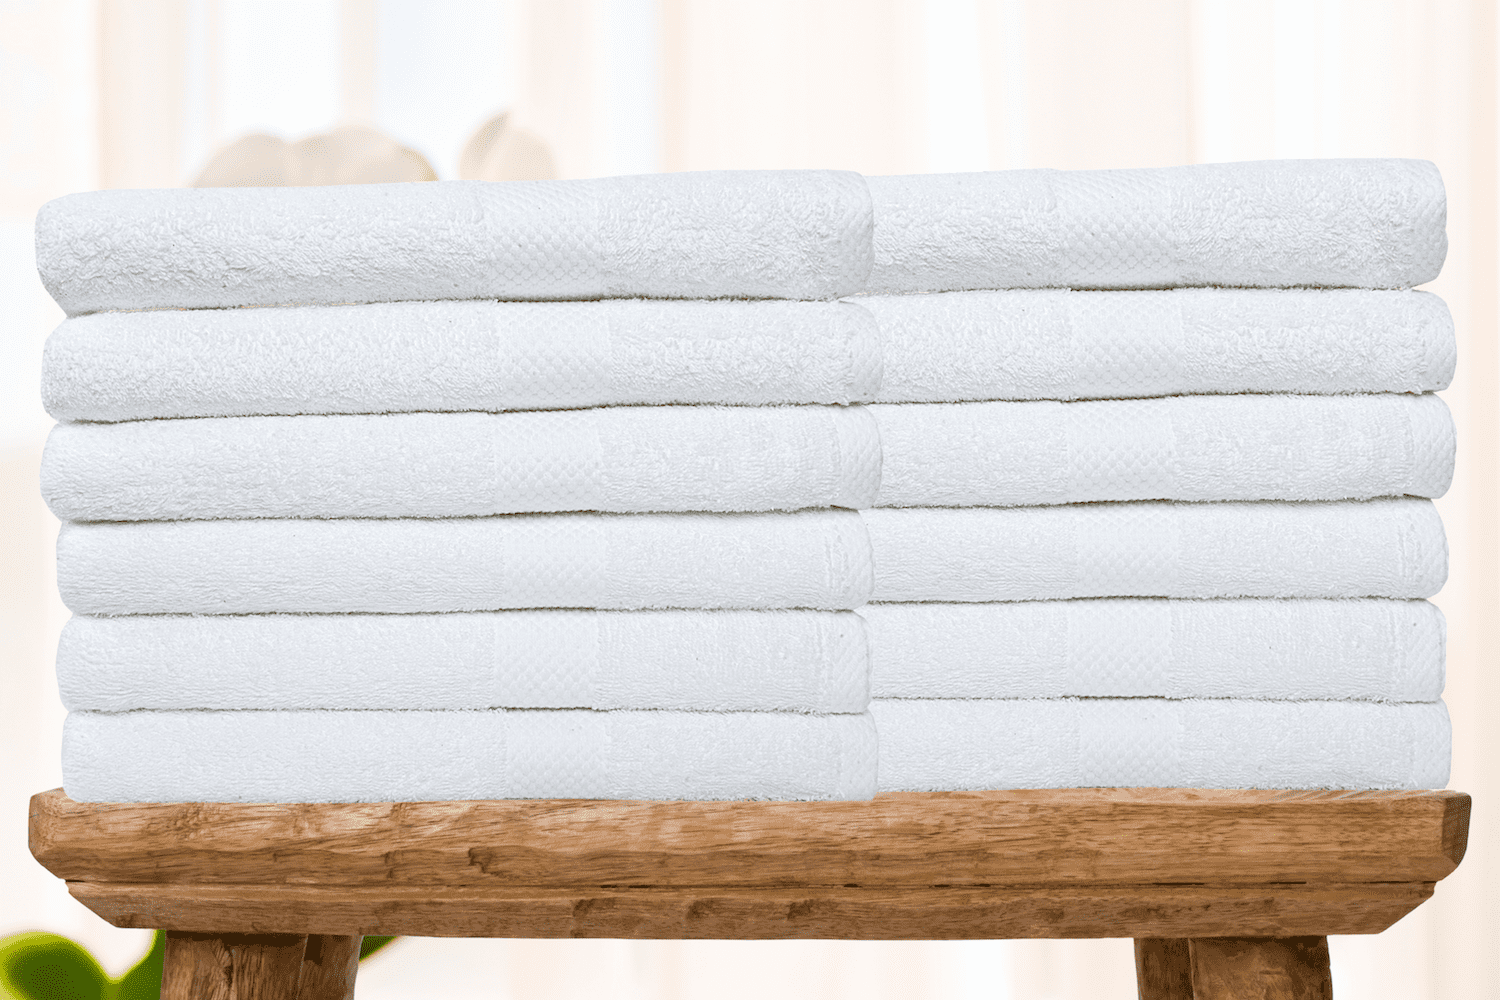 Linteum Textile Supply 27x52 in. Hotel Quality Bath Towels Highly Absorbent  Durable Bath Towels with 100% Soft Cotton Material